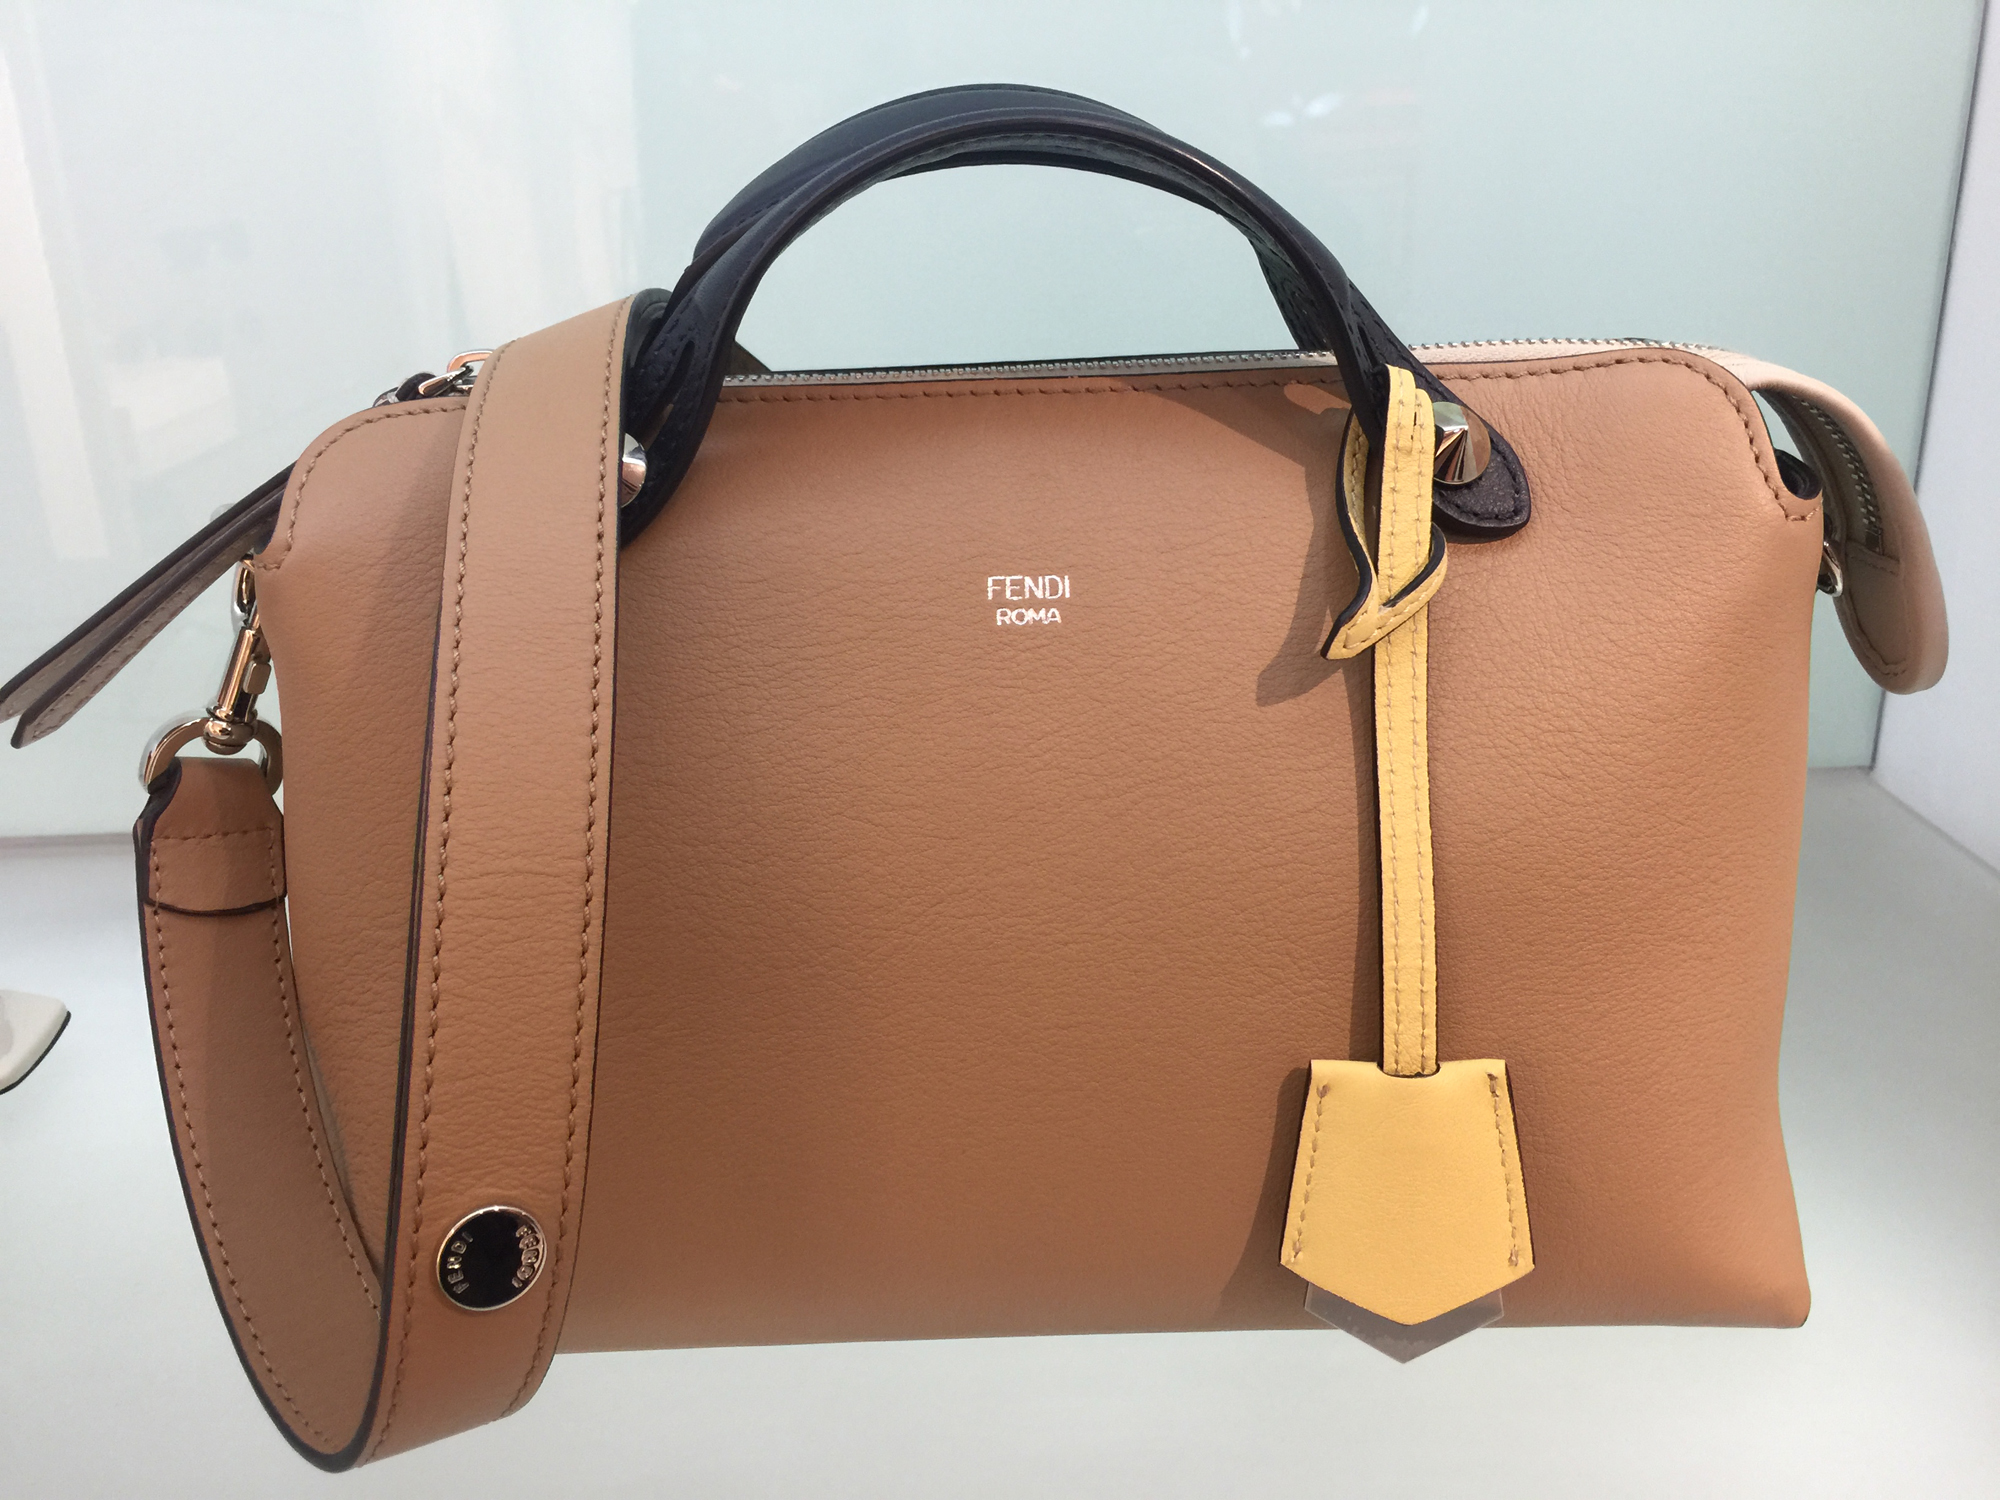 Fendi By The Way Bag Honest Review | I Make Leather Handbags